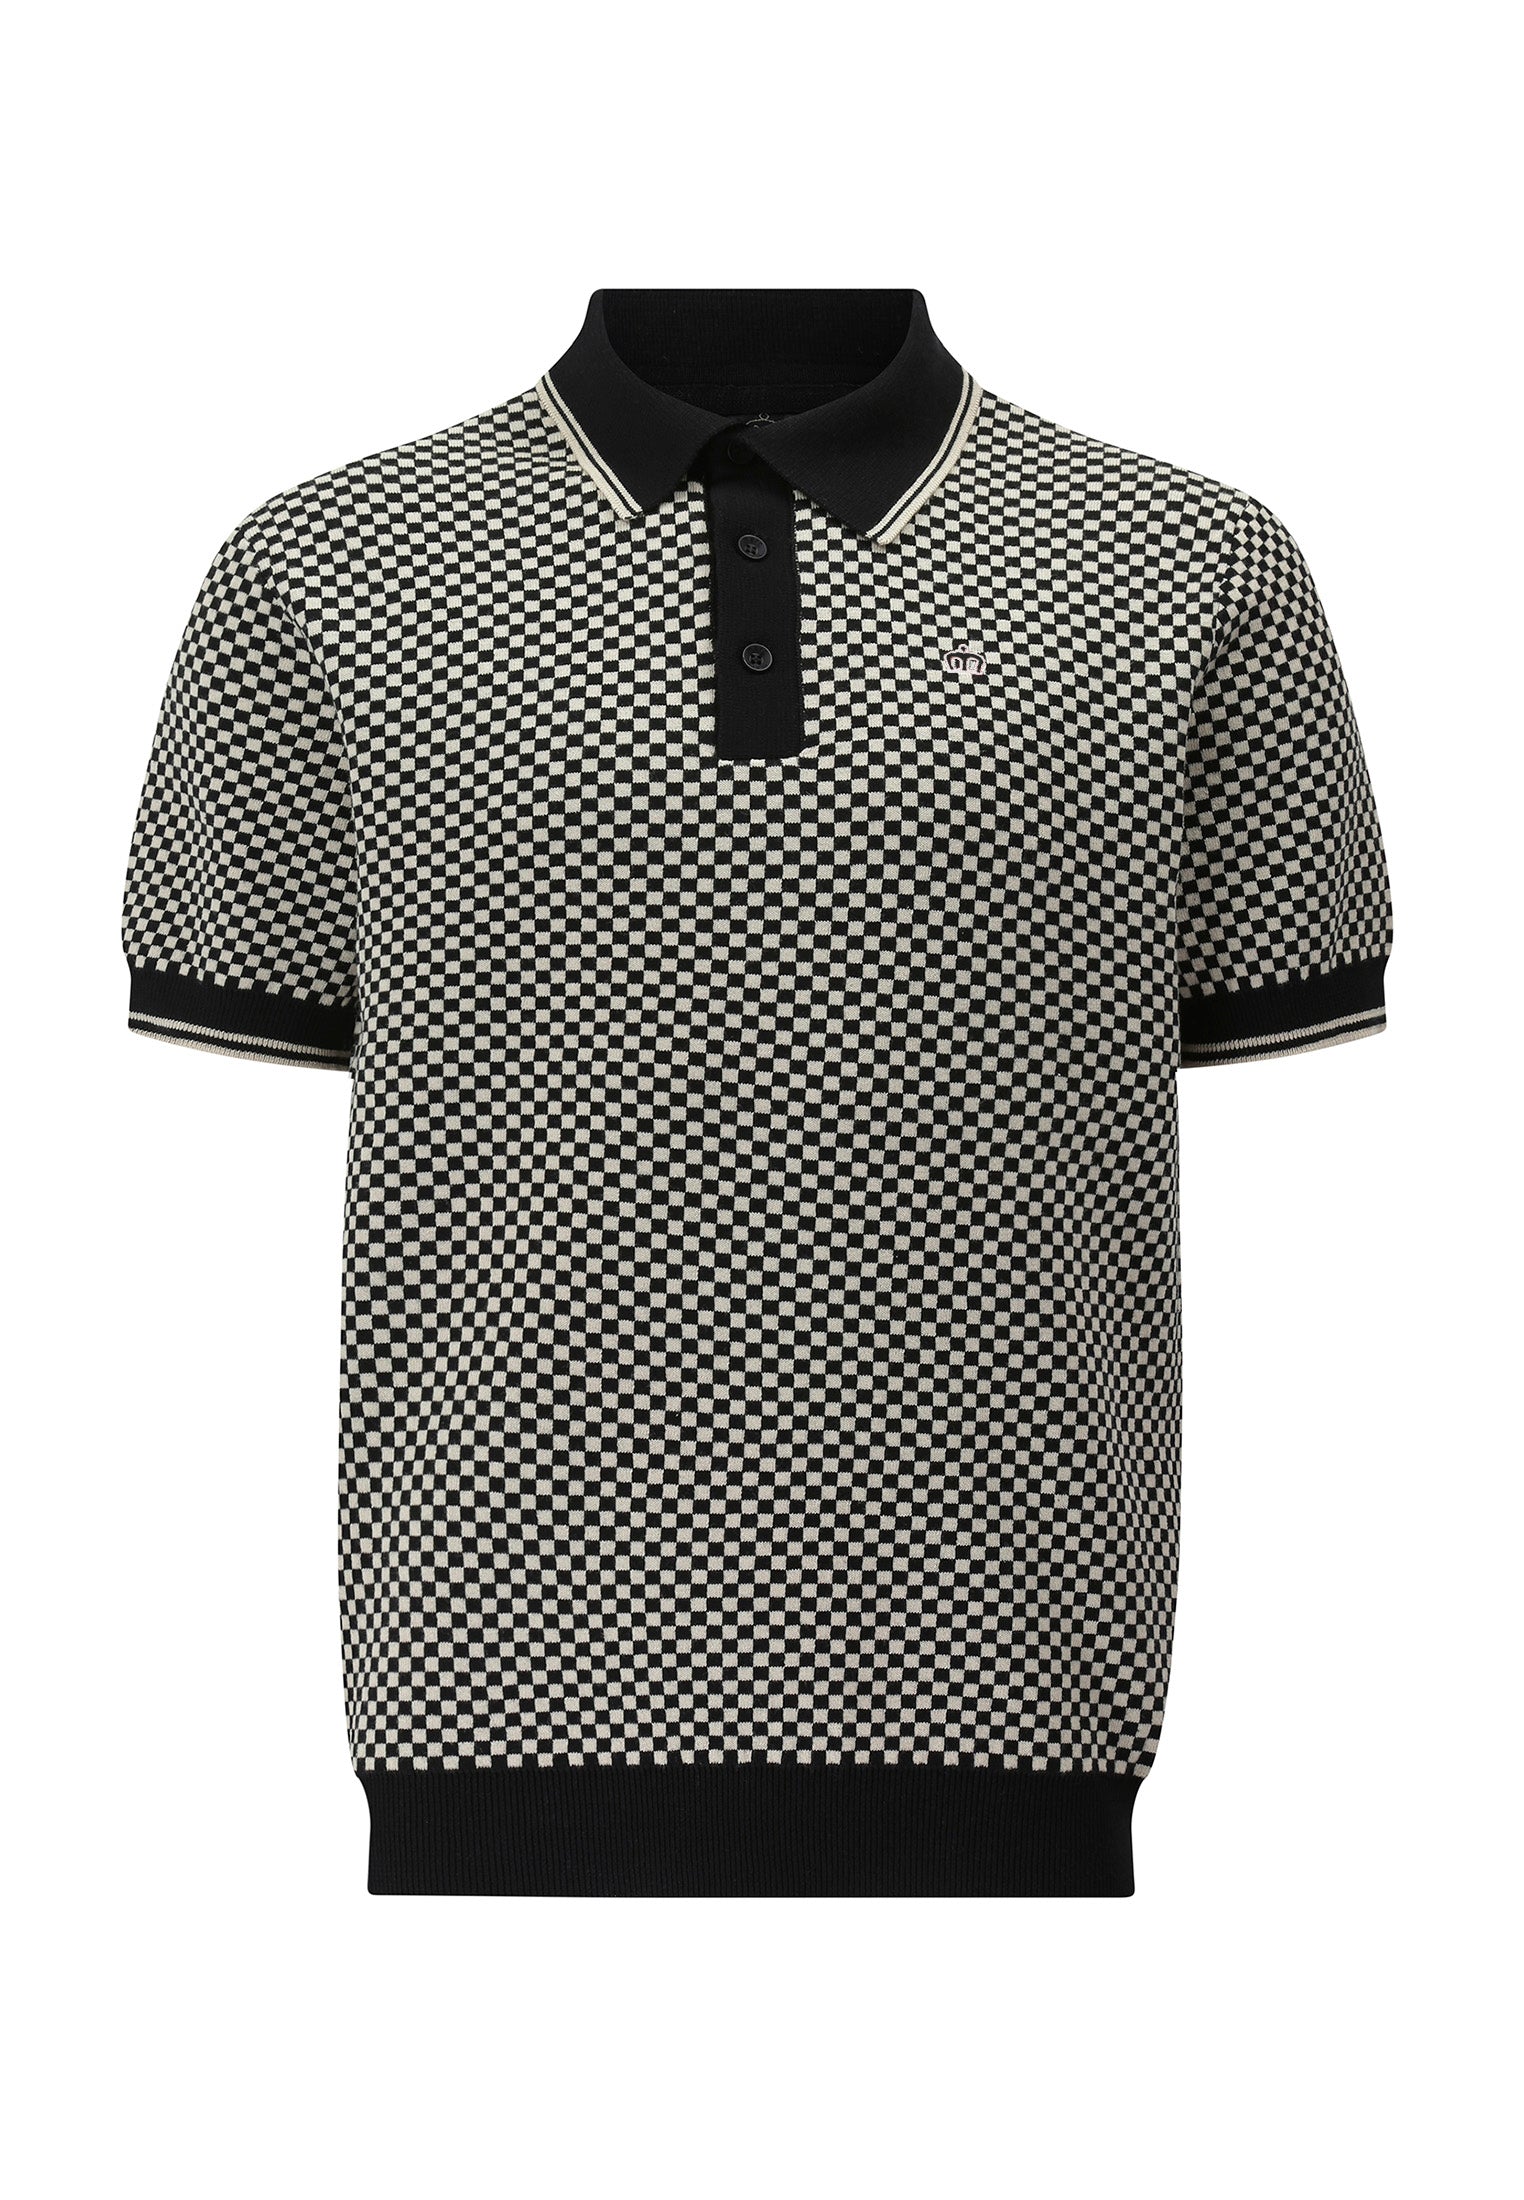 Check Knitted Polo Shirt by Merc